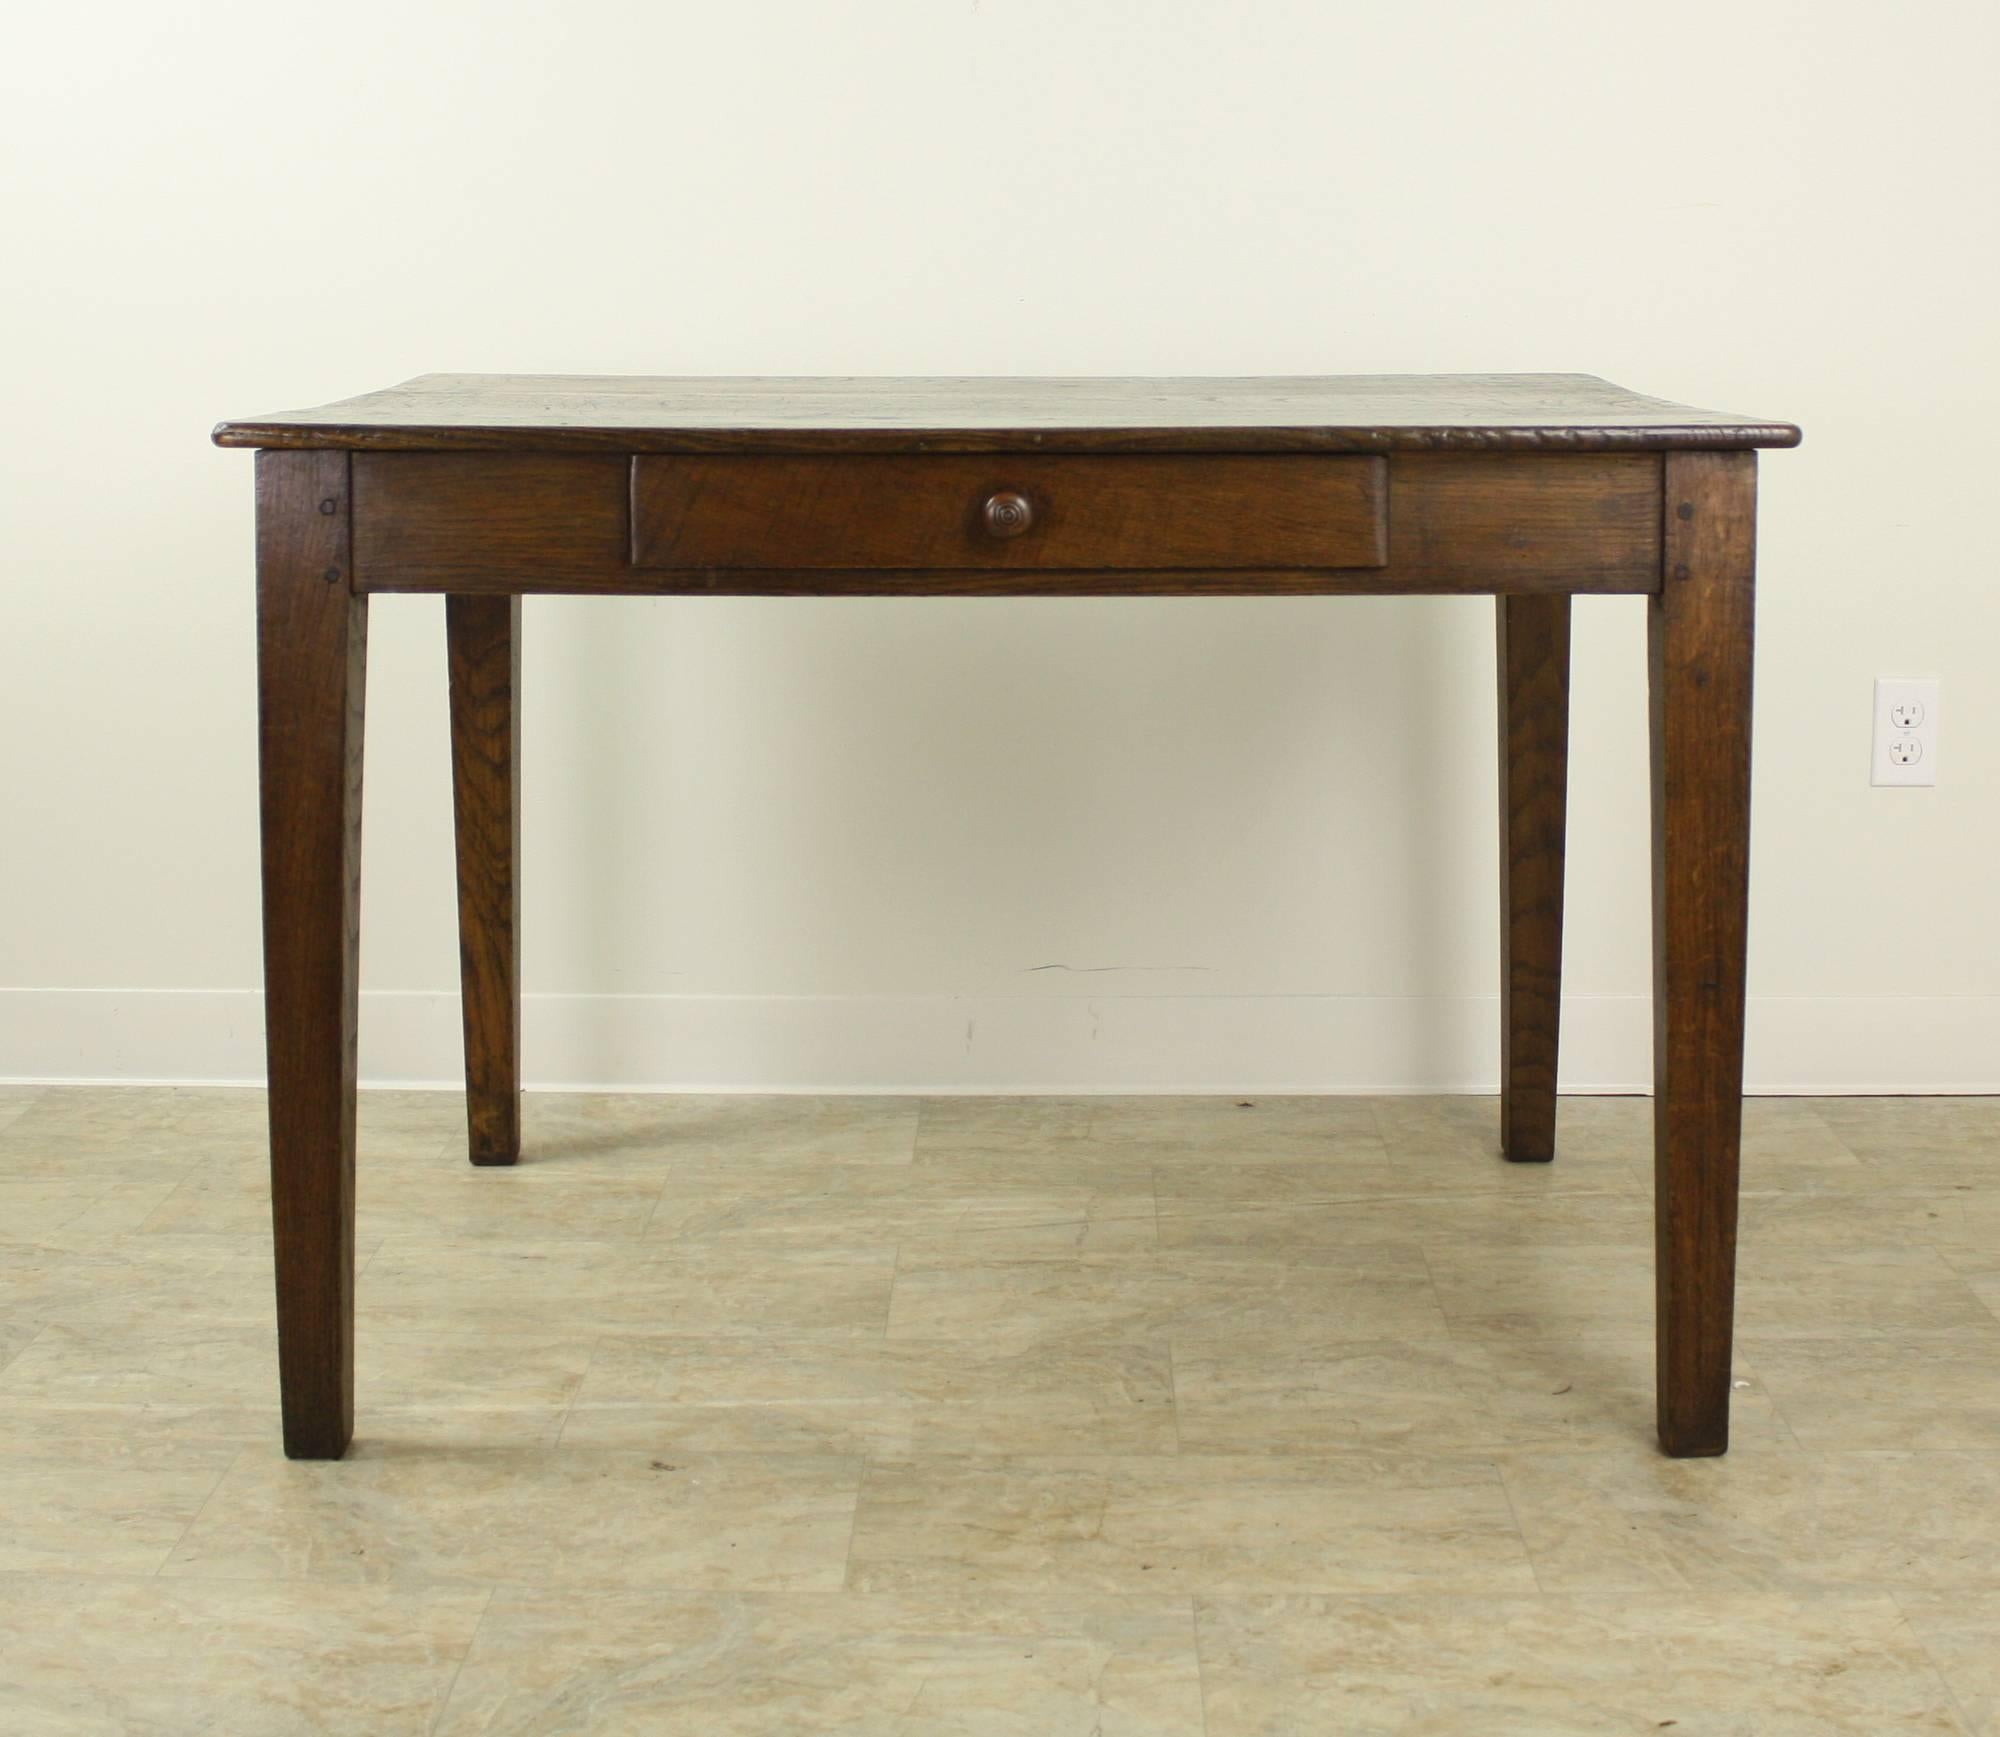 A handsome dark chestnut writing table with generous proportions on sturdy tapered legs. The wood has nice color and patina, and the extra depth of the piece makes it an elegant and functional work surface. One single drawer. At 25